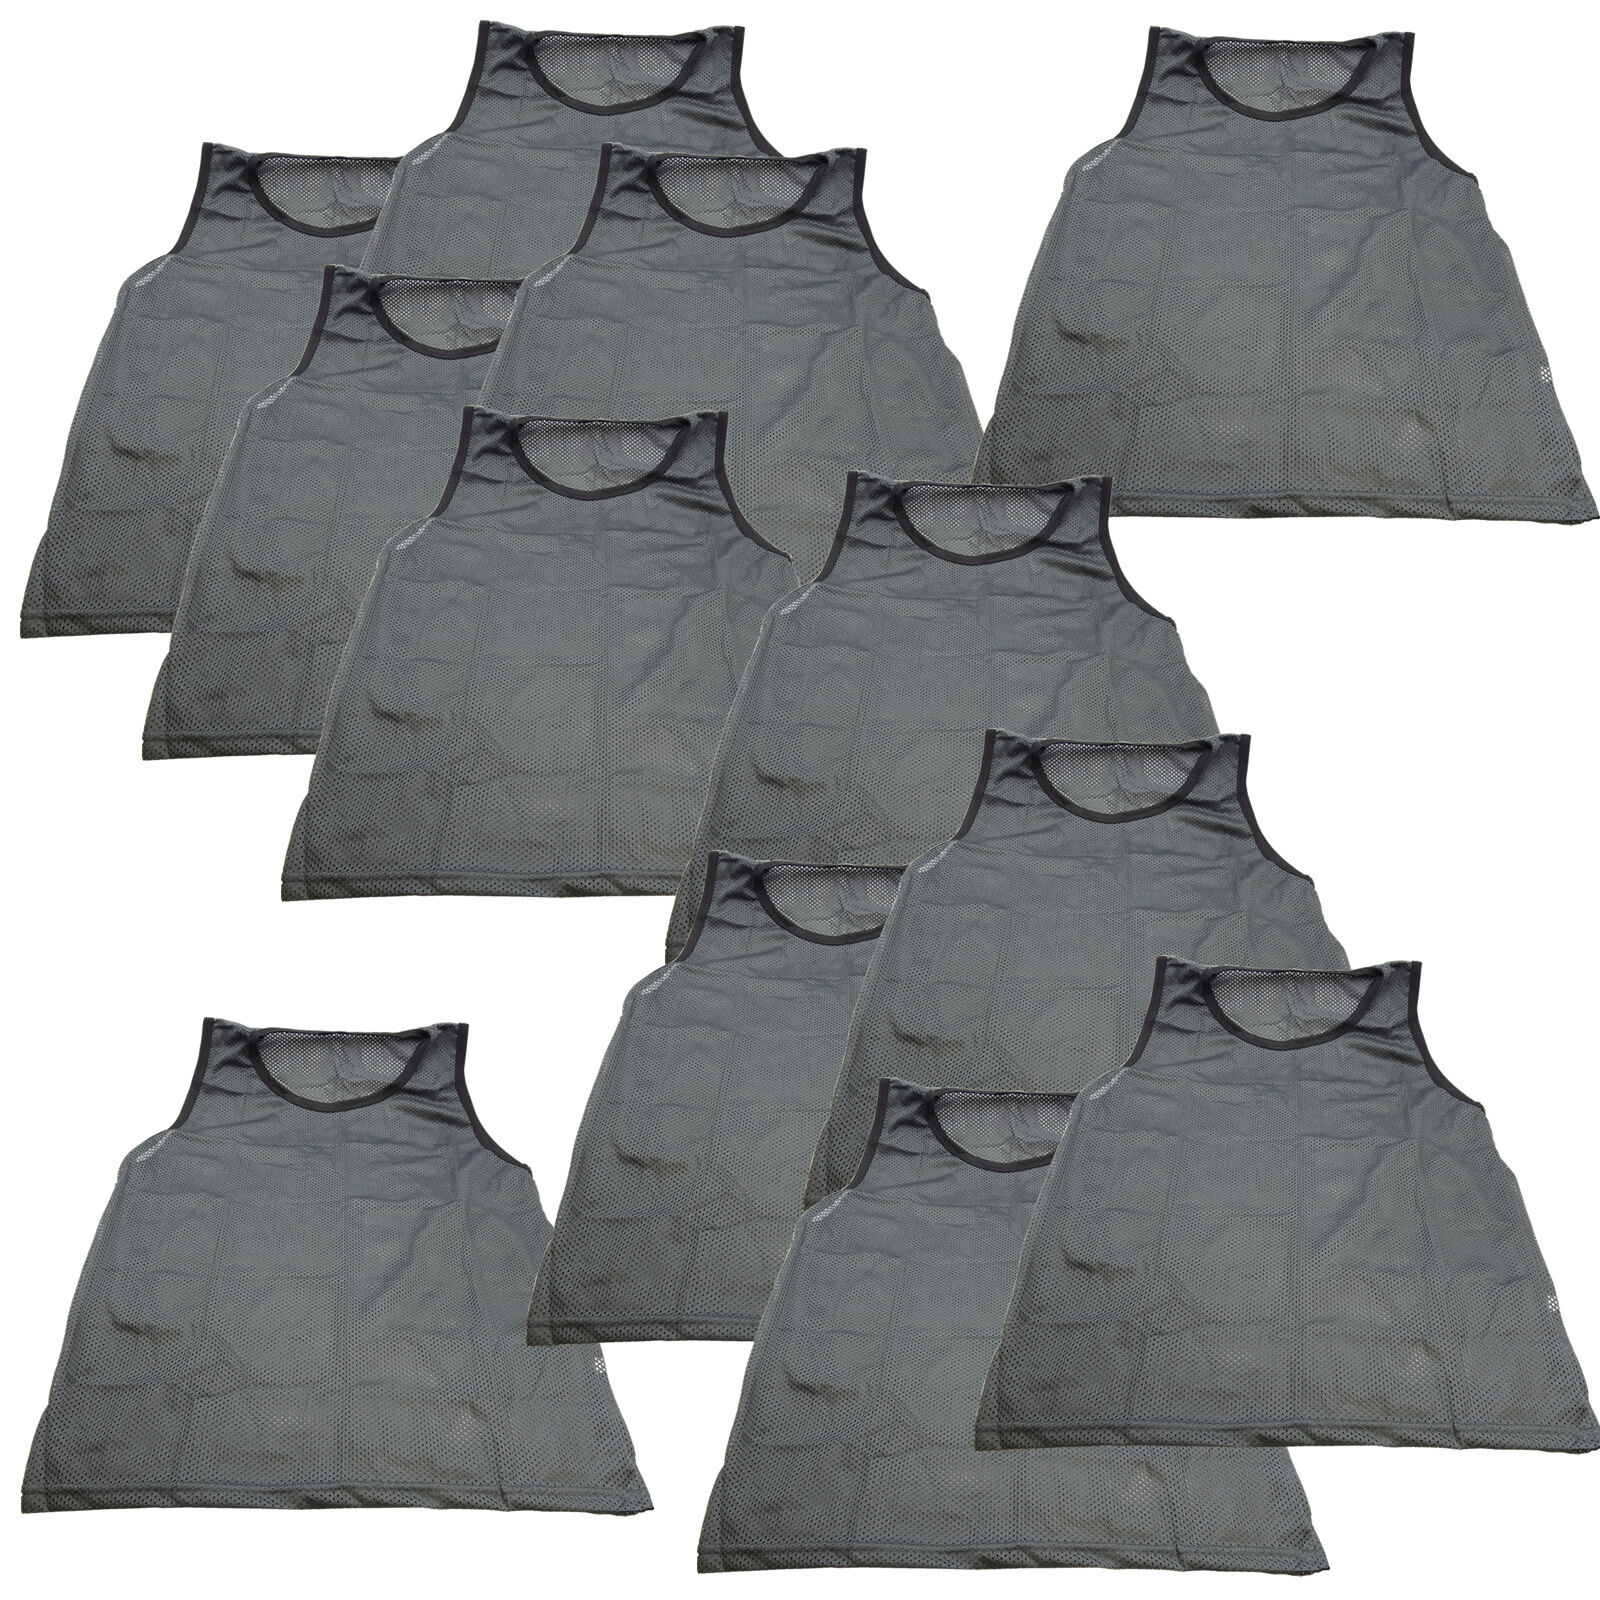 Great Choice Products 12 Scrimmage Vests Pinnies Soccer Adult Gray Grey New!